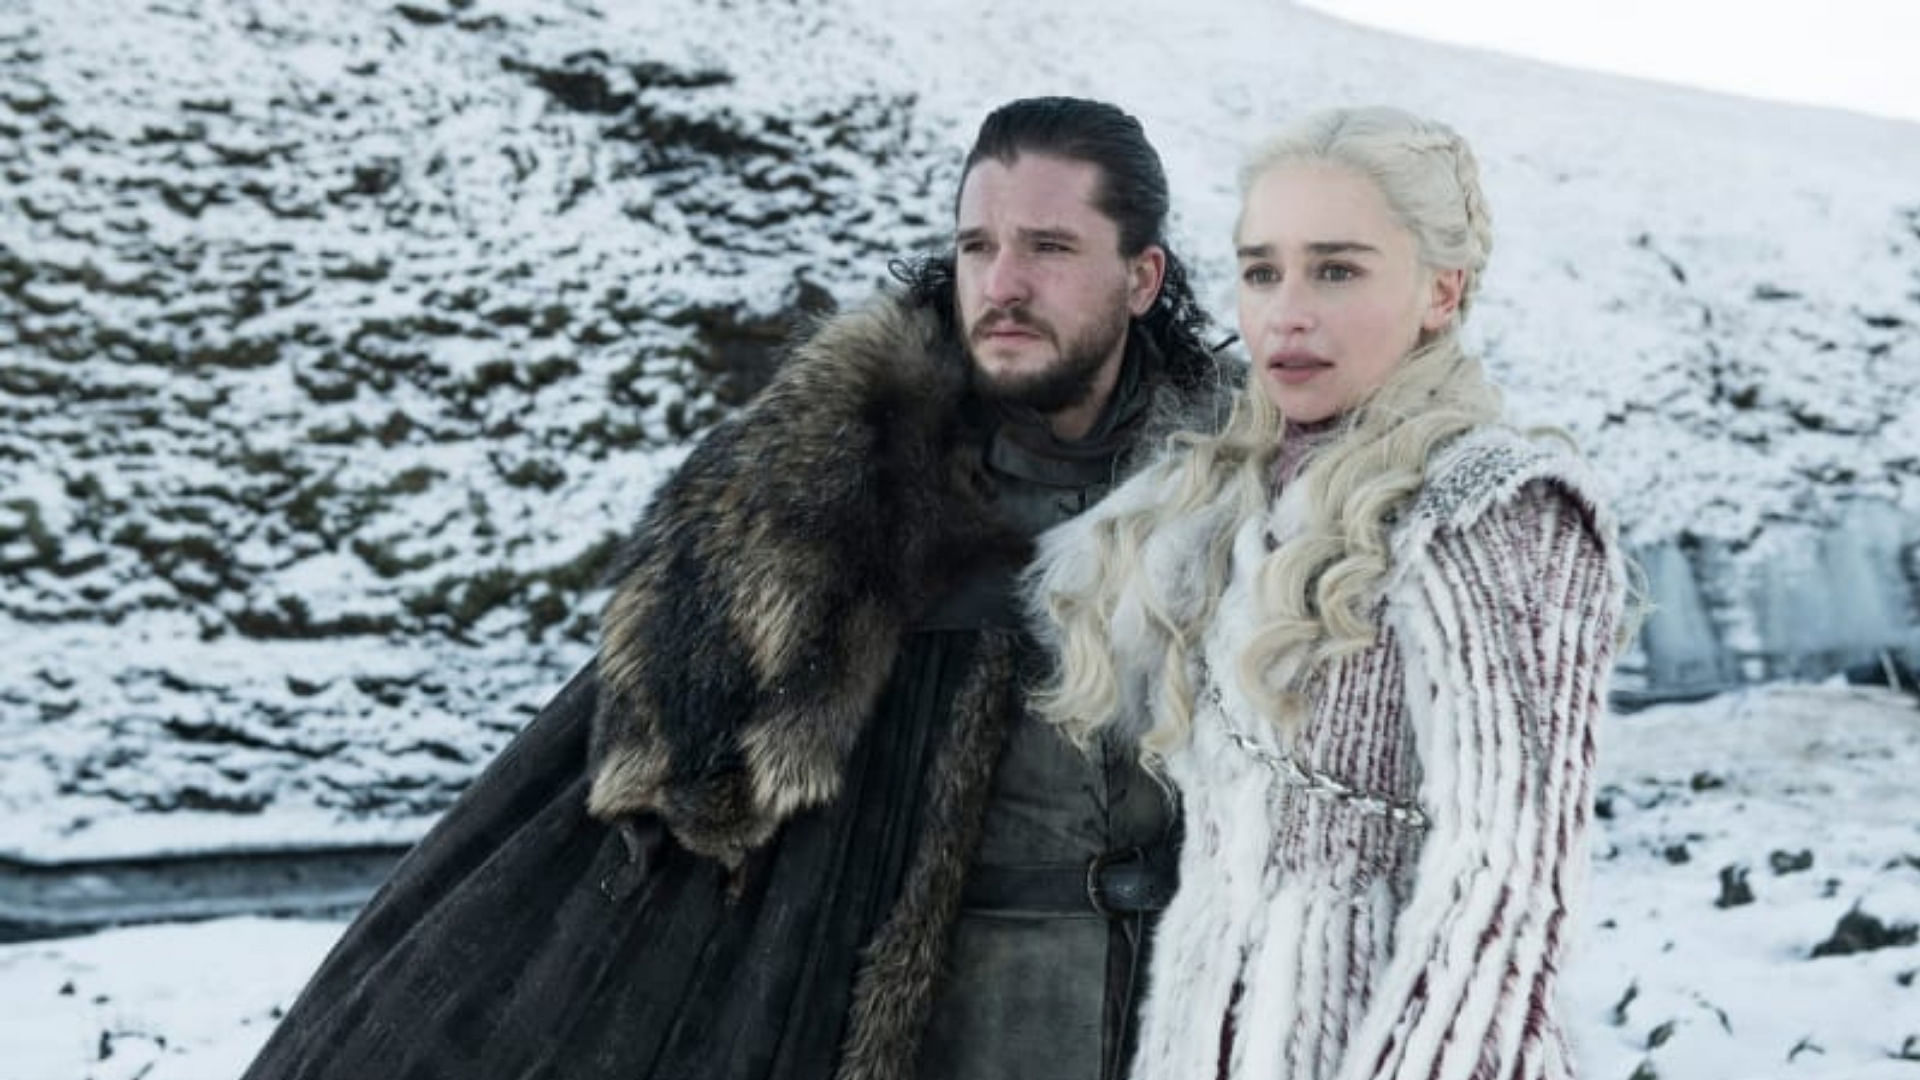 Jon Snow and Daenerys prepare themselves for the Battle of Winterfell.